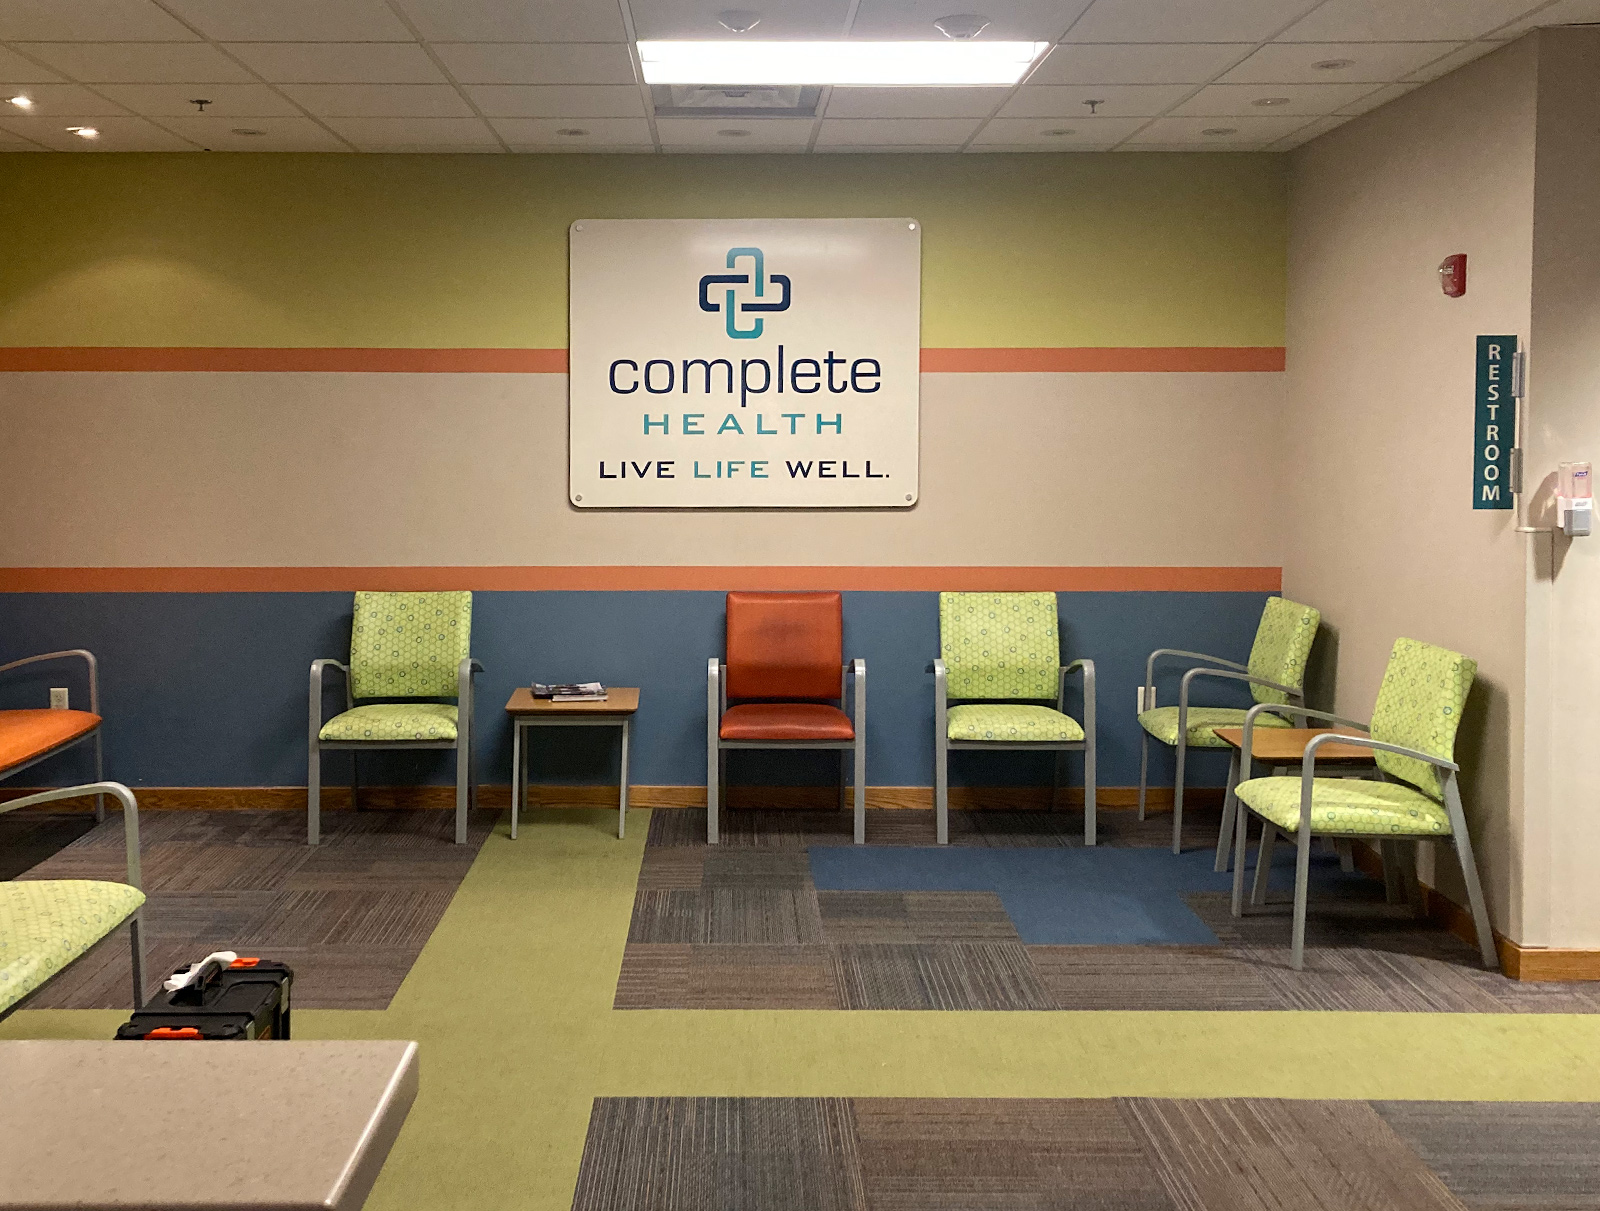 Complete Health Waiting Room Signage